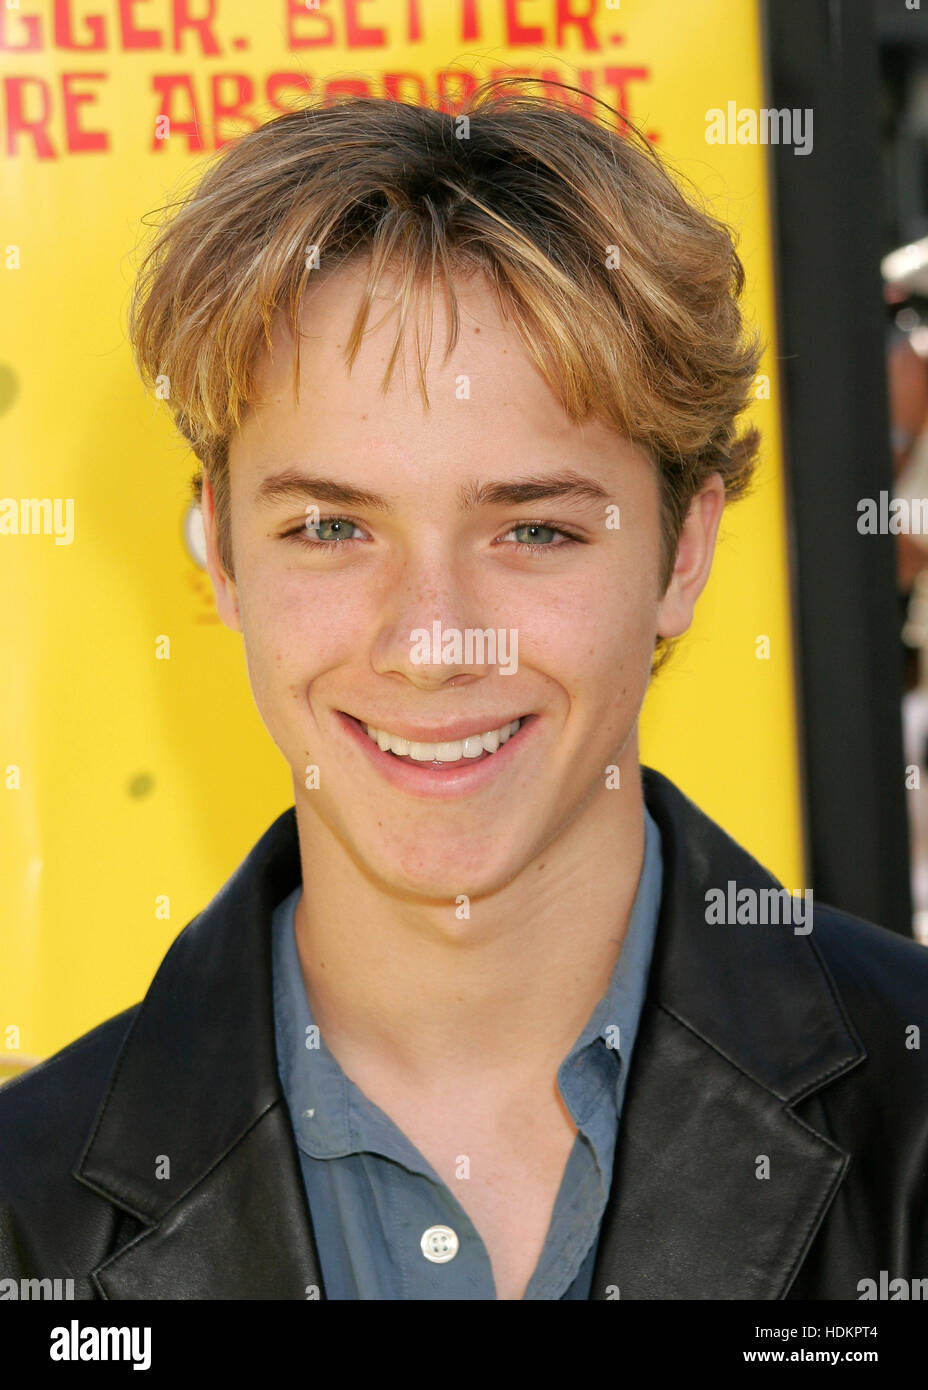 Jeremy Sumpter at the November 14, 2004 Los Angeles premiere of the film, 'The Spongebob Squarepants Movie' at the Grauman's Chinese Theatre. Photo credit: Francis Specker Stock Photo